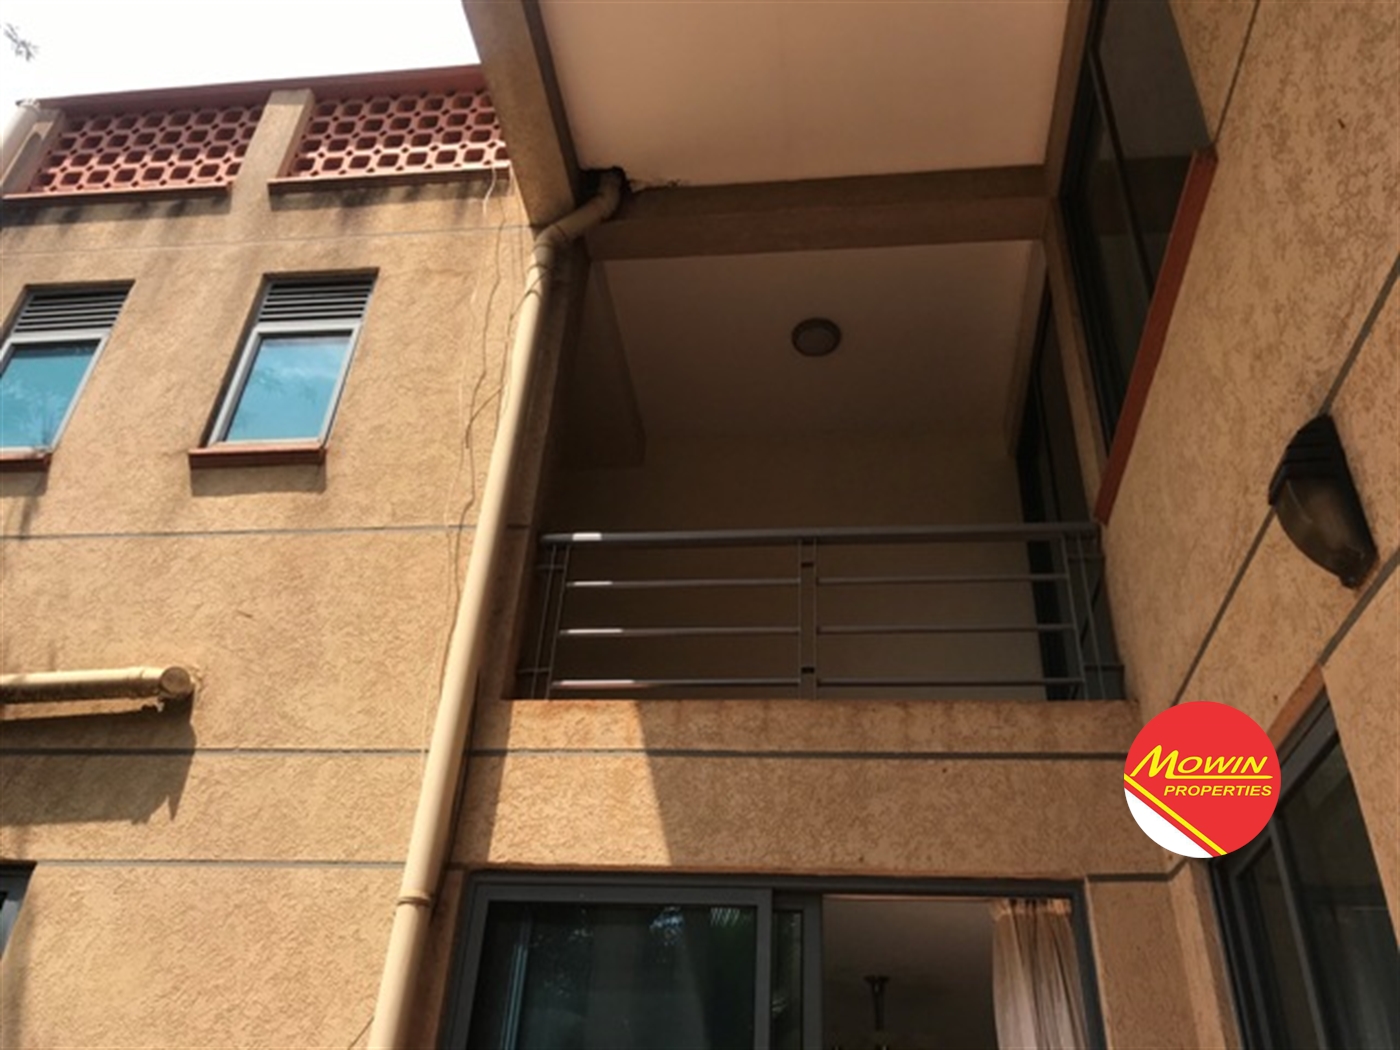 Town House for rent in Lugogo Kampala